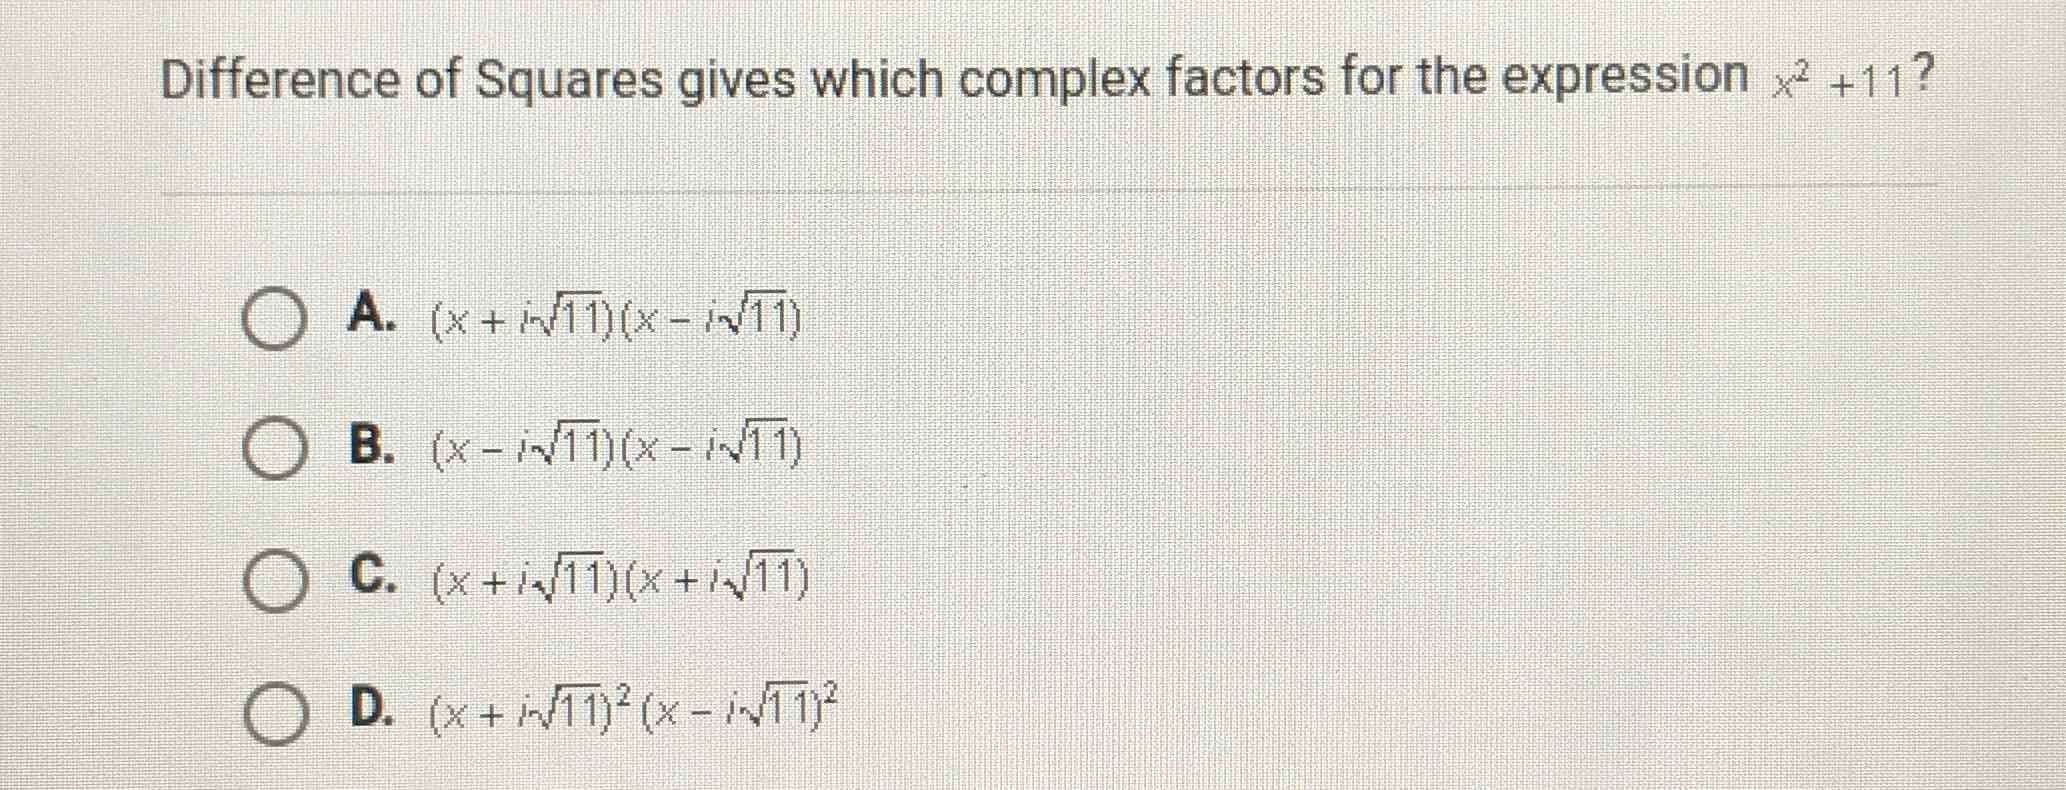 Difference of Squares gives which complex factors for the expression \( x^{2}+11 \) ?
A. \( (x+i \sqrt{11})(x-i \sqrt{11}) \)
B. \( (x-i \sqrt{11})(x-i \sqrt{11}) \)
C. \( (x+i \sqrt{11})(x+i \sqrt{11}) \)
D. \( (x+i \sqrt{11})^{2}(x-i \sqrt{11})^{2} \)